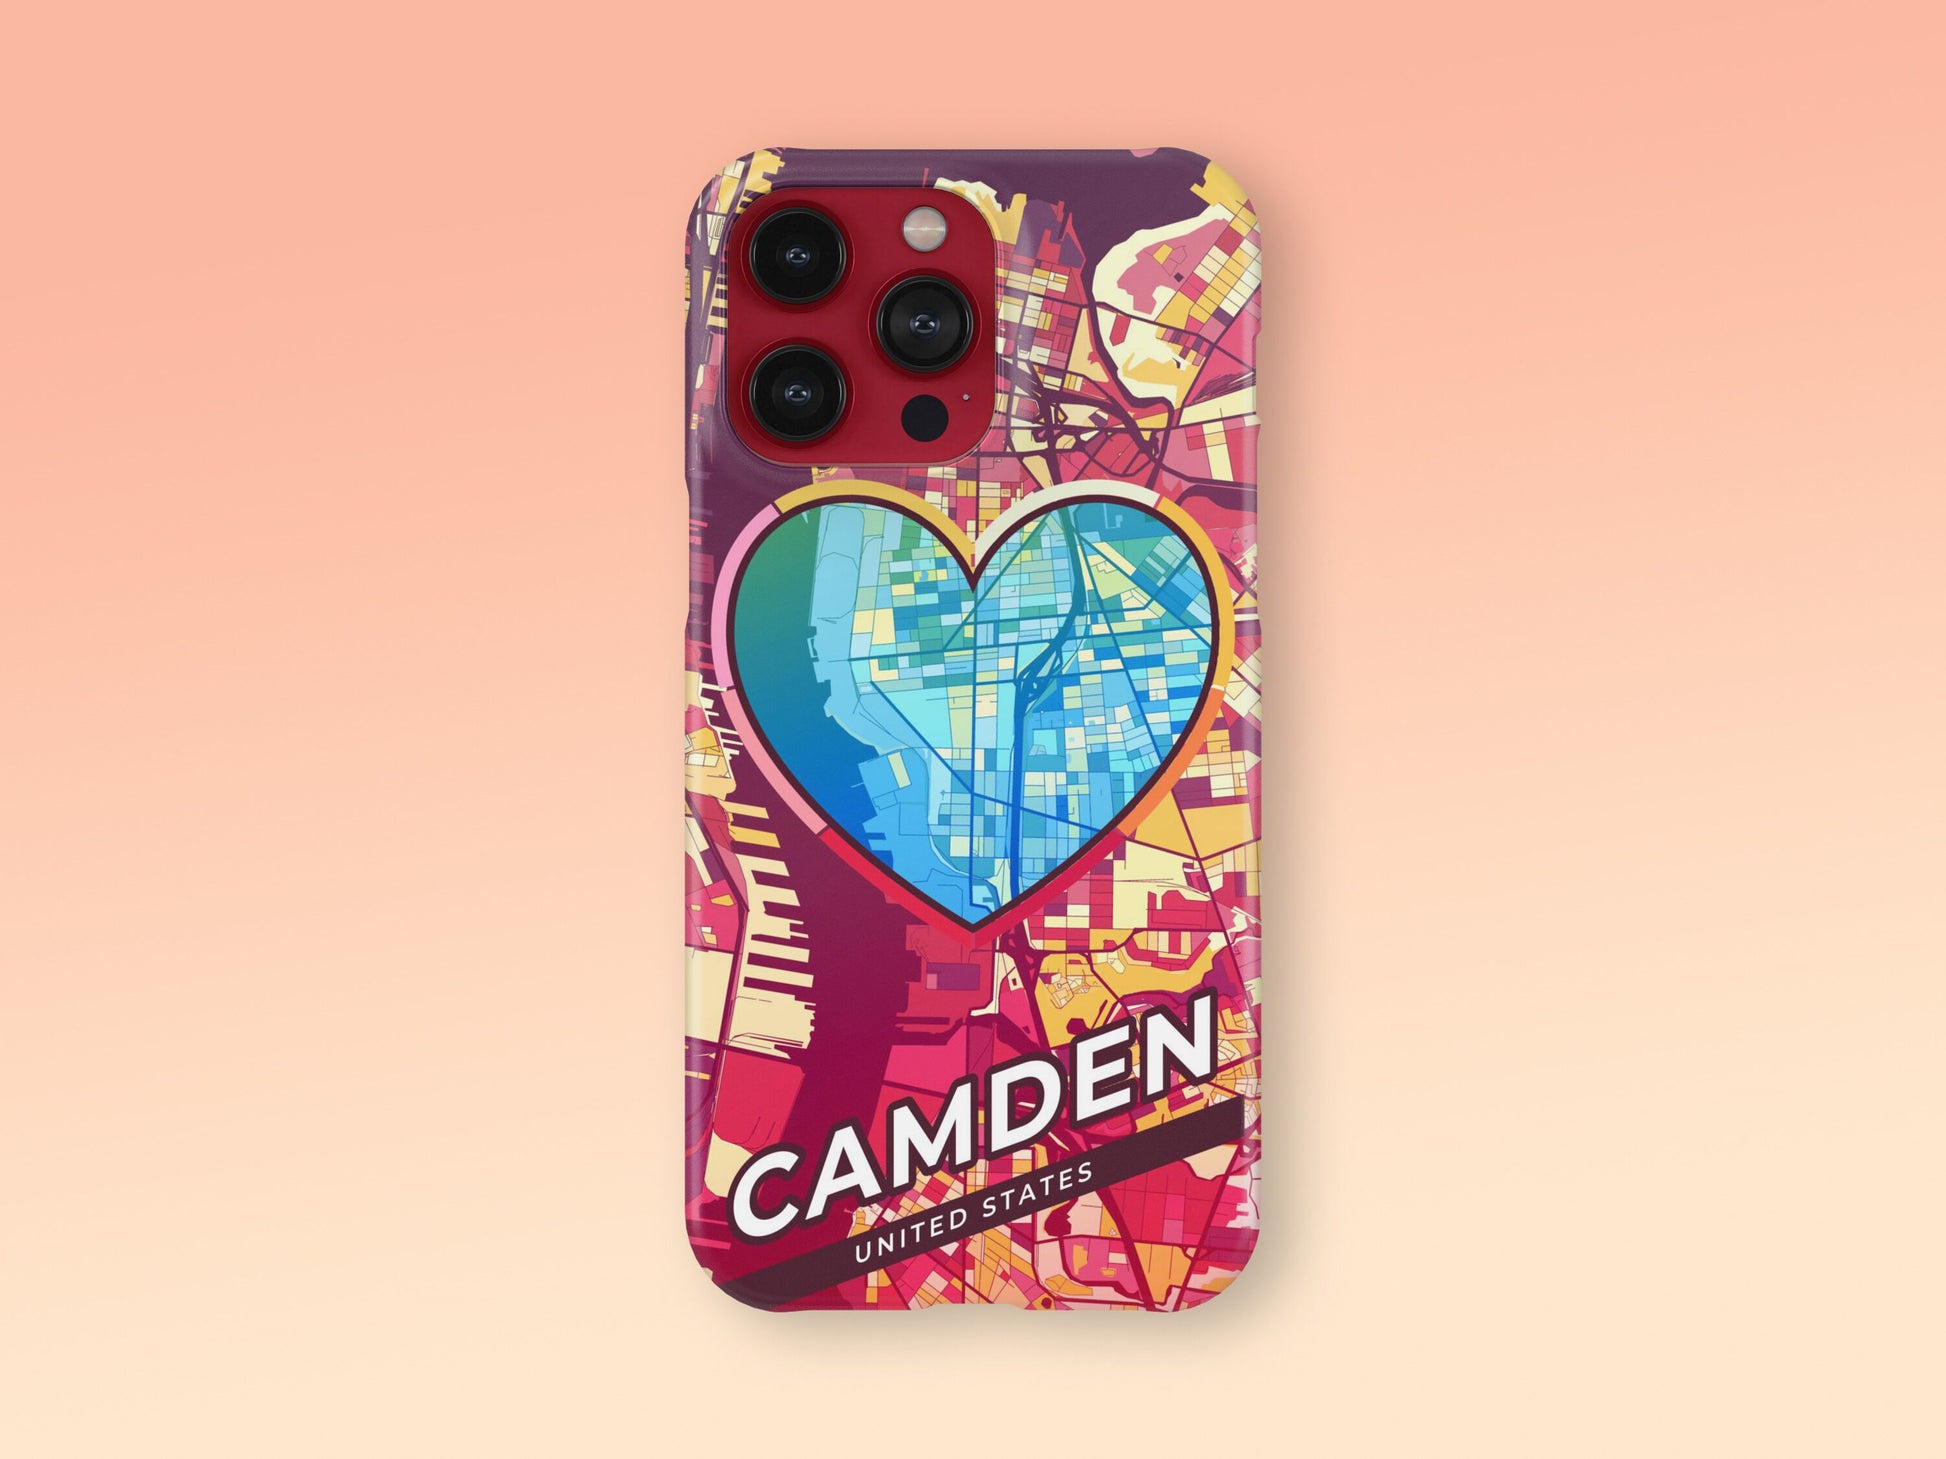 Camden New Jersey slim phone case with colorful icon. Birthday, wedding or housewarming gift. Couple match cases. 2